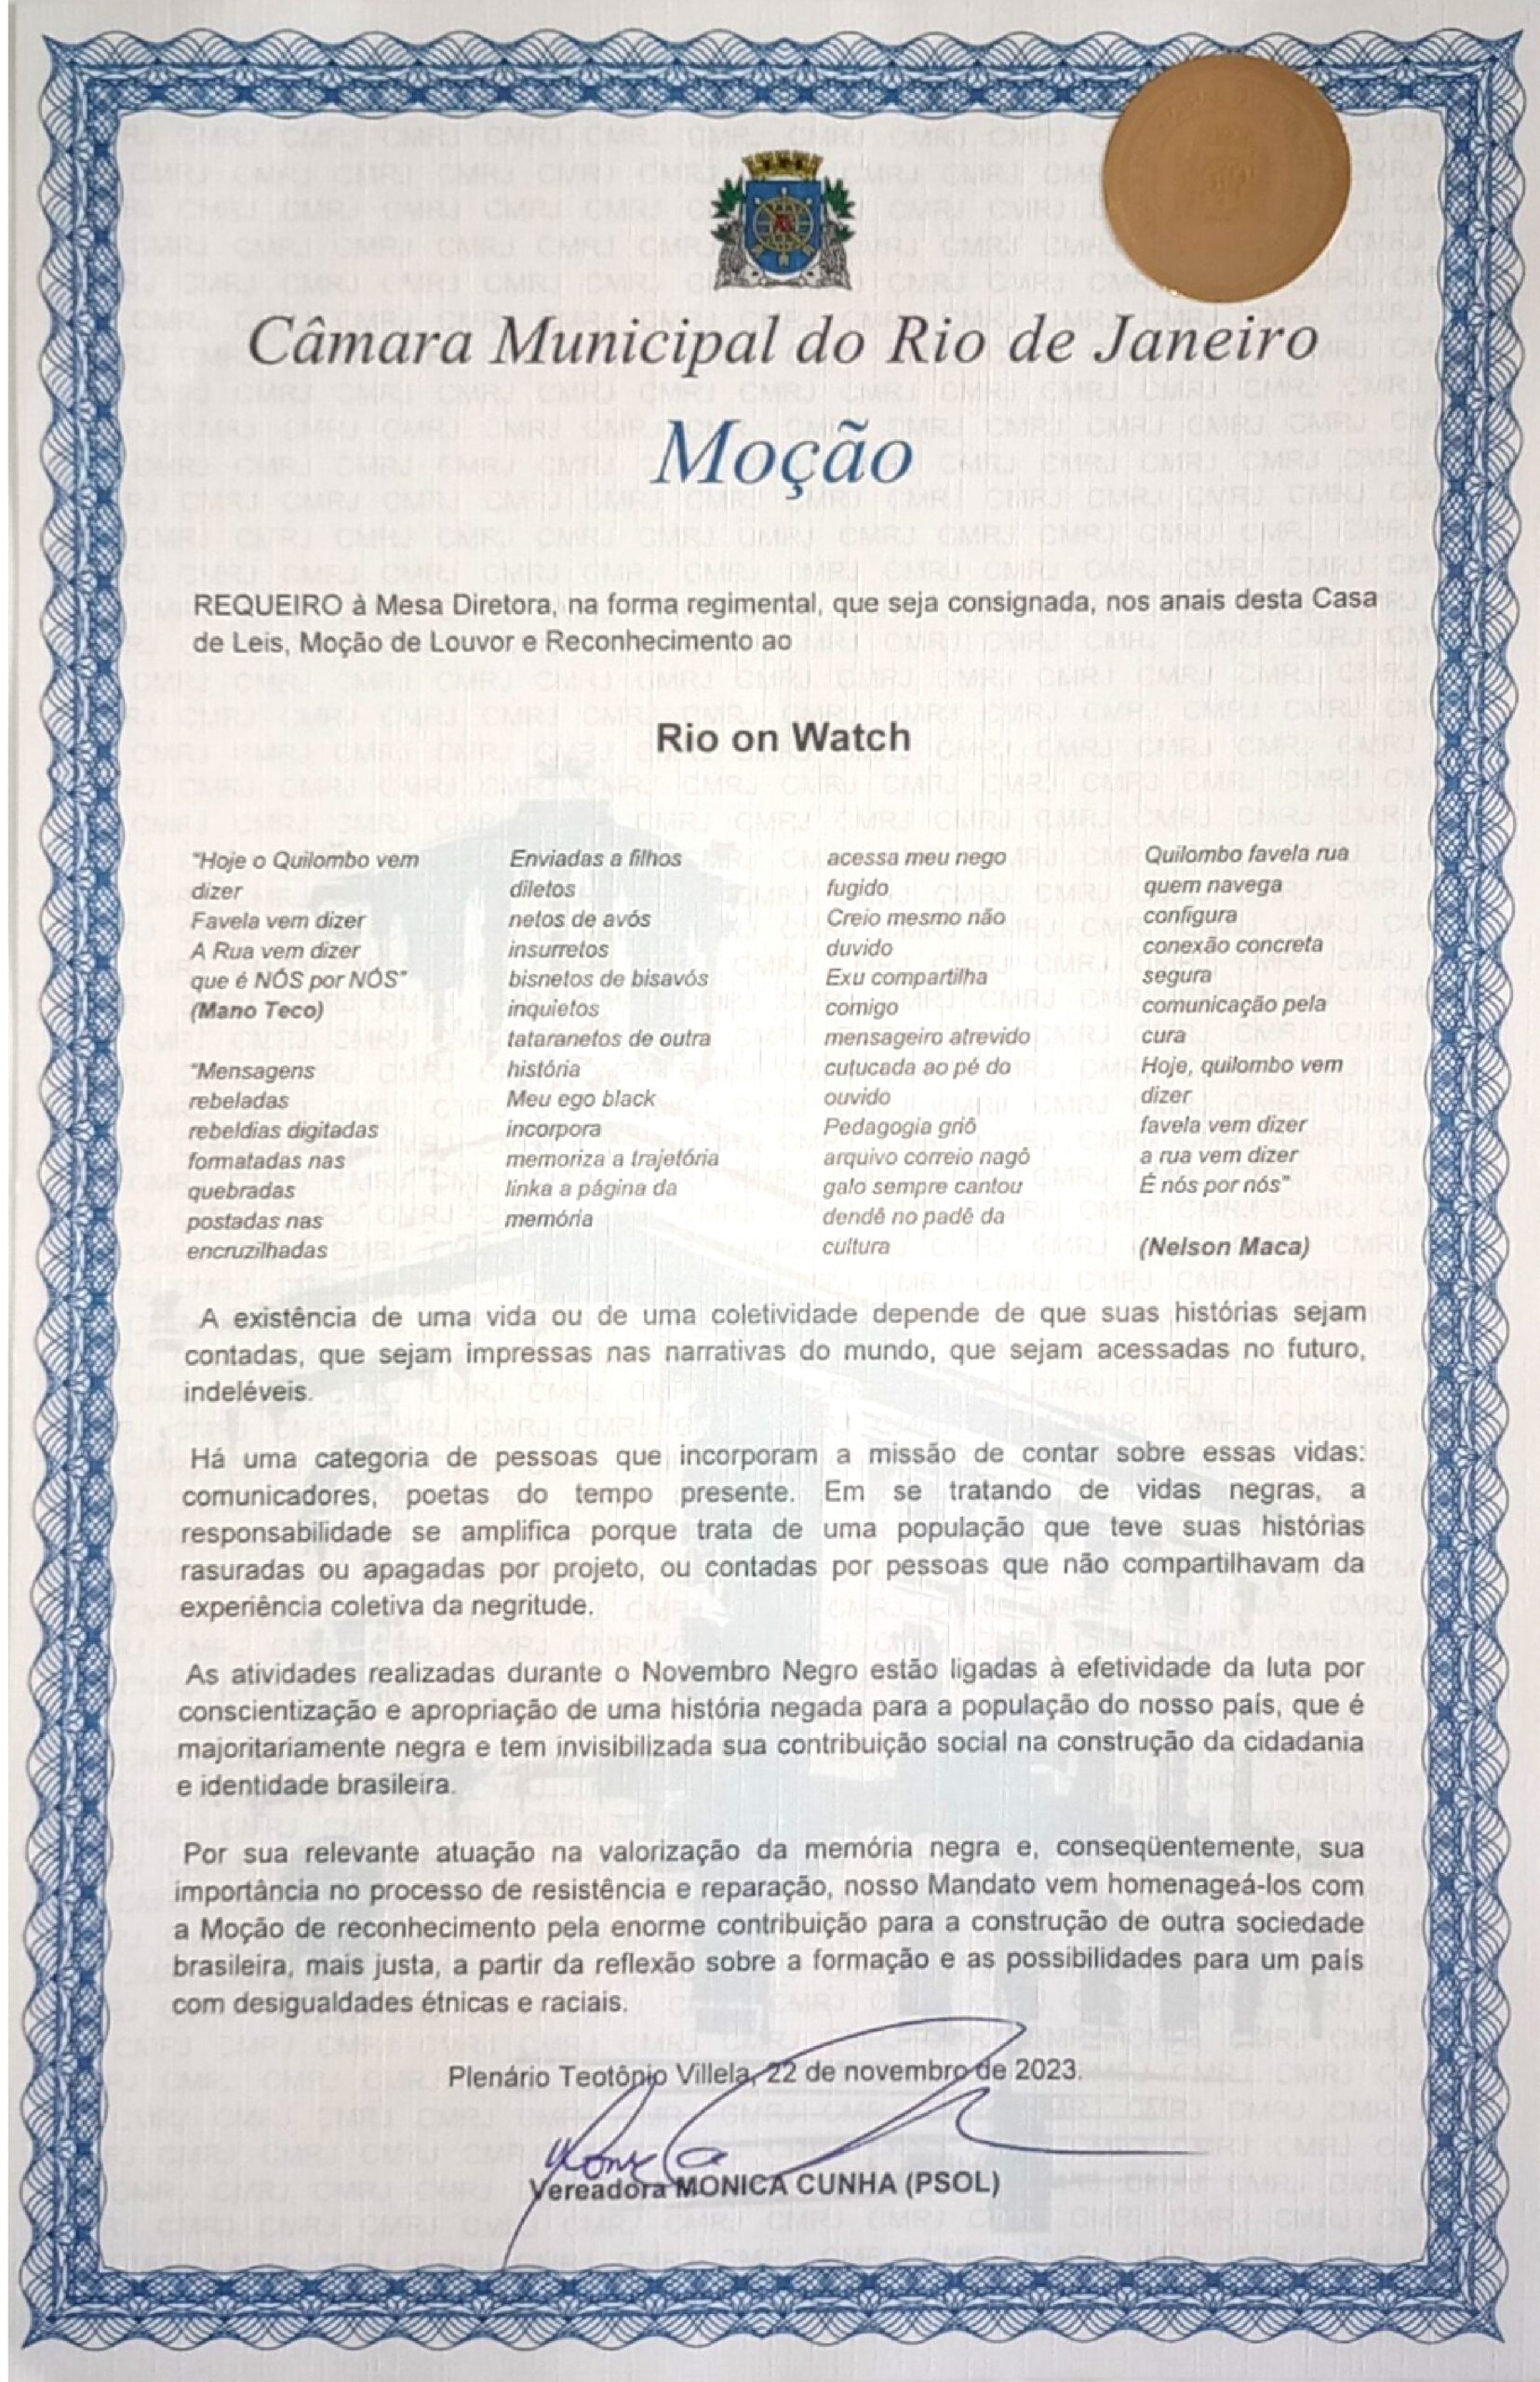 Example of a Motion of Praise and Recognition, this one given to RioOnWatch, as a portal for favela narratives and an anti-racist means of communication. 